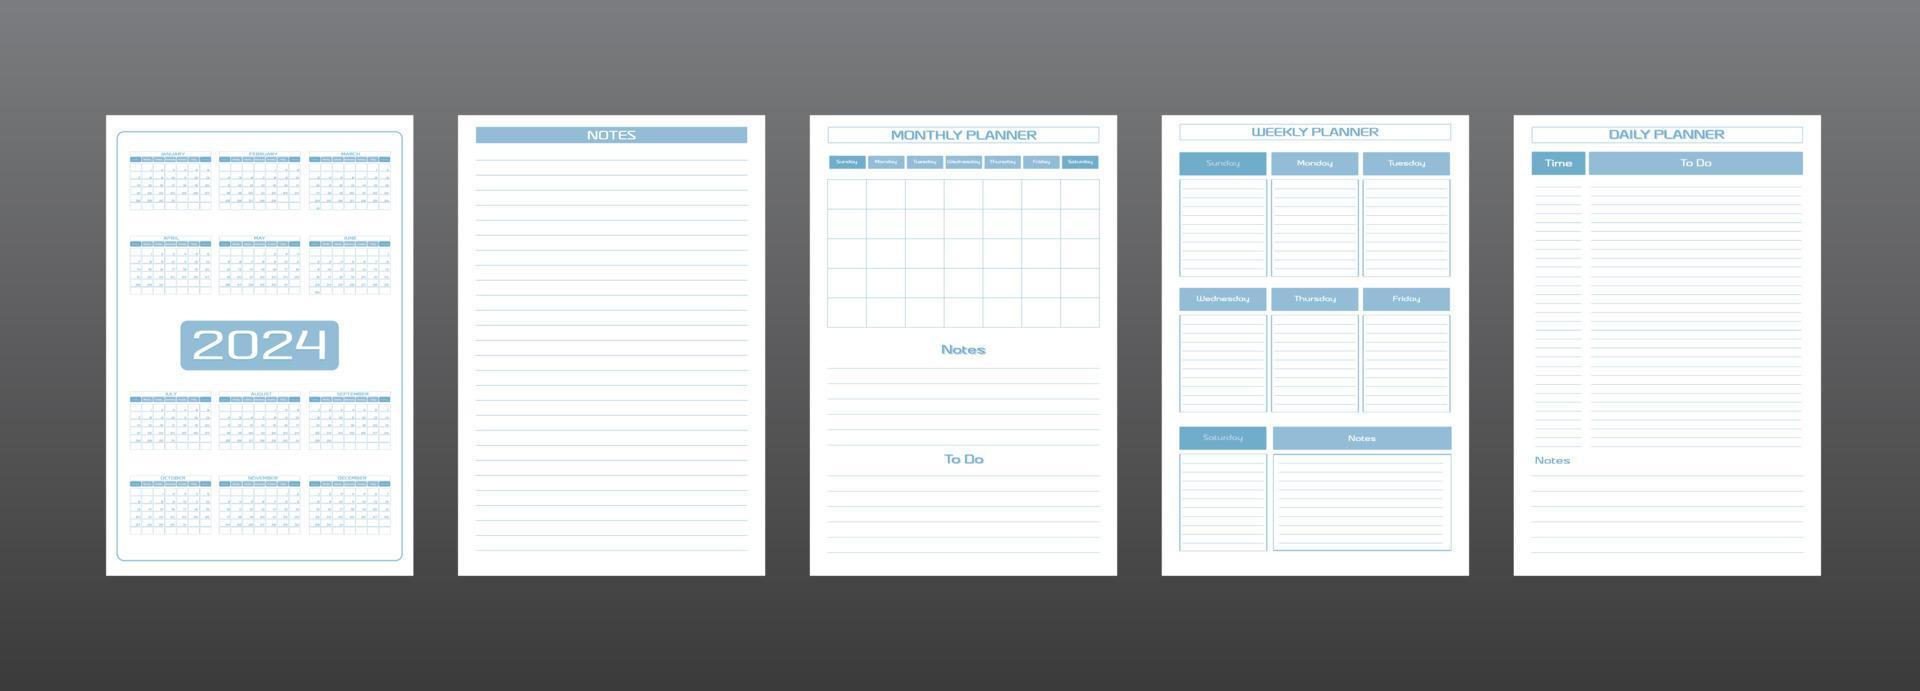 2024 calendar daily weekly monthly personal planner diary template in